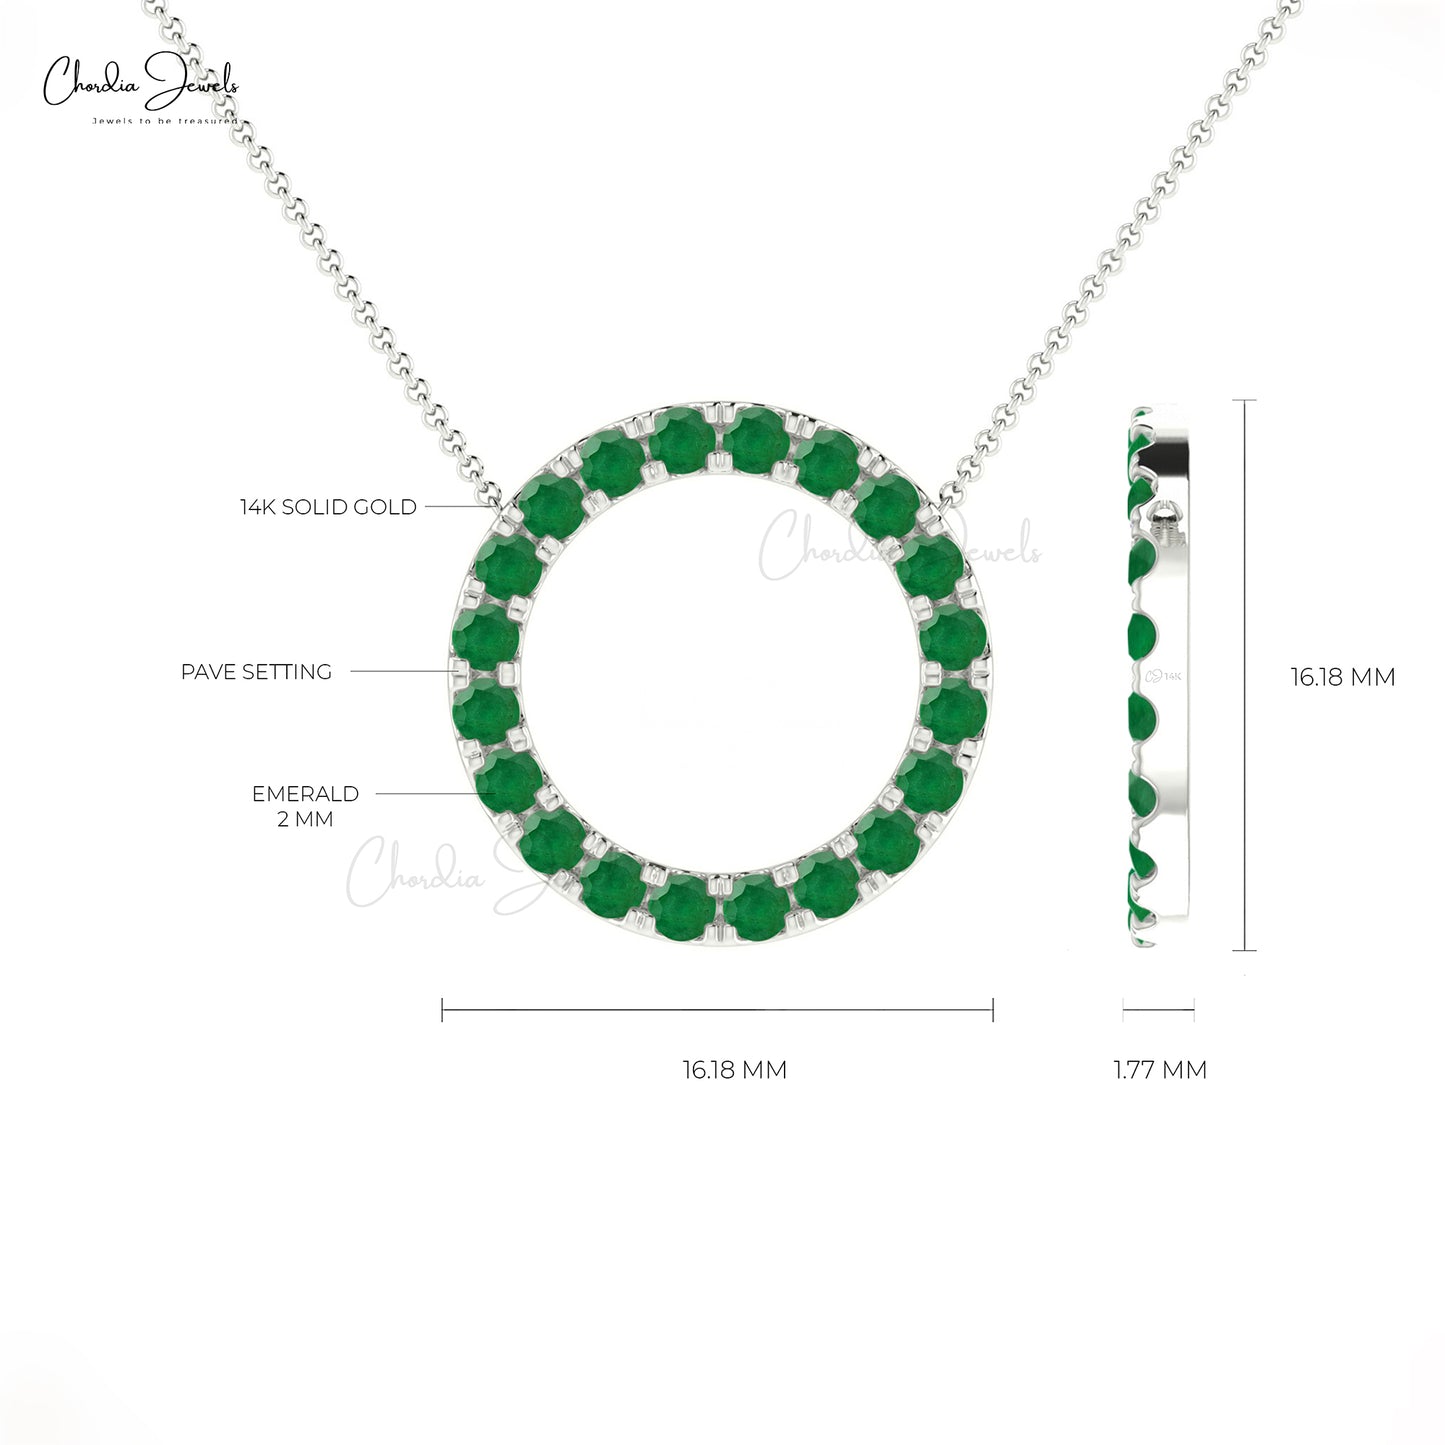 Authentic Green Emerald Circle Necklace Pendant With Spring Ring Closure Pure 14k Gold Jewelry Anniversary Gift For Wife